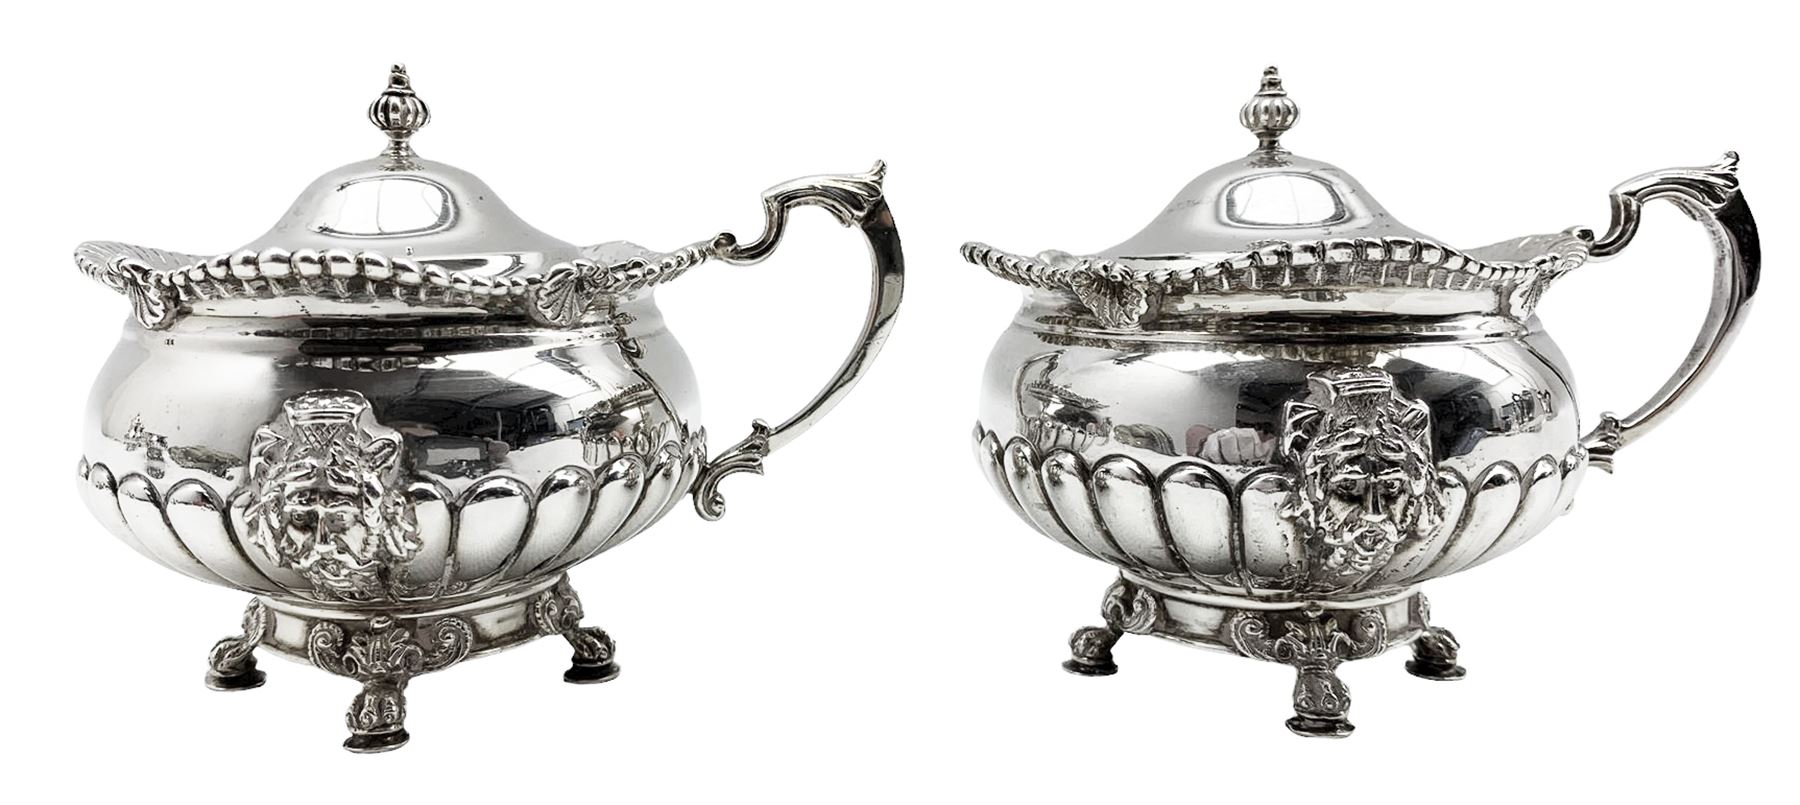 Early 20th century silver double condiment set of circular design with gadrooned borders - Image 3 of 5